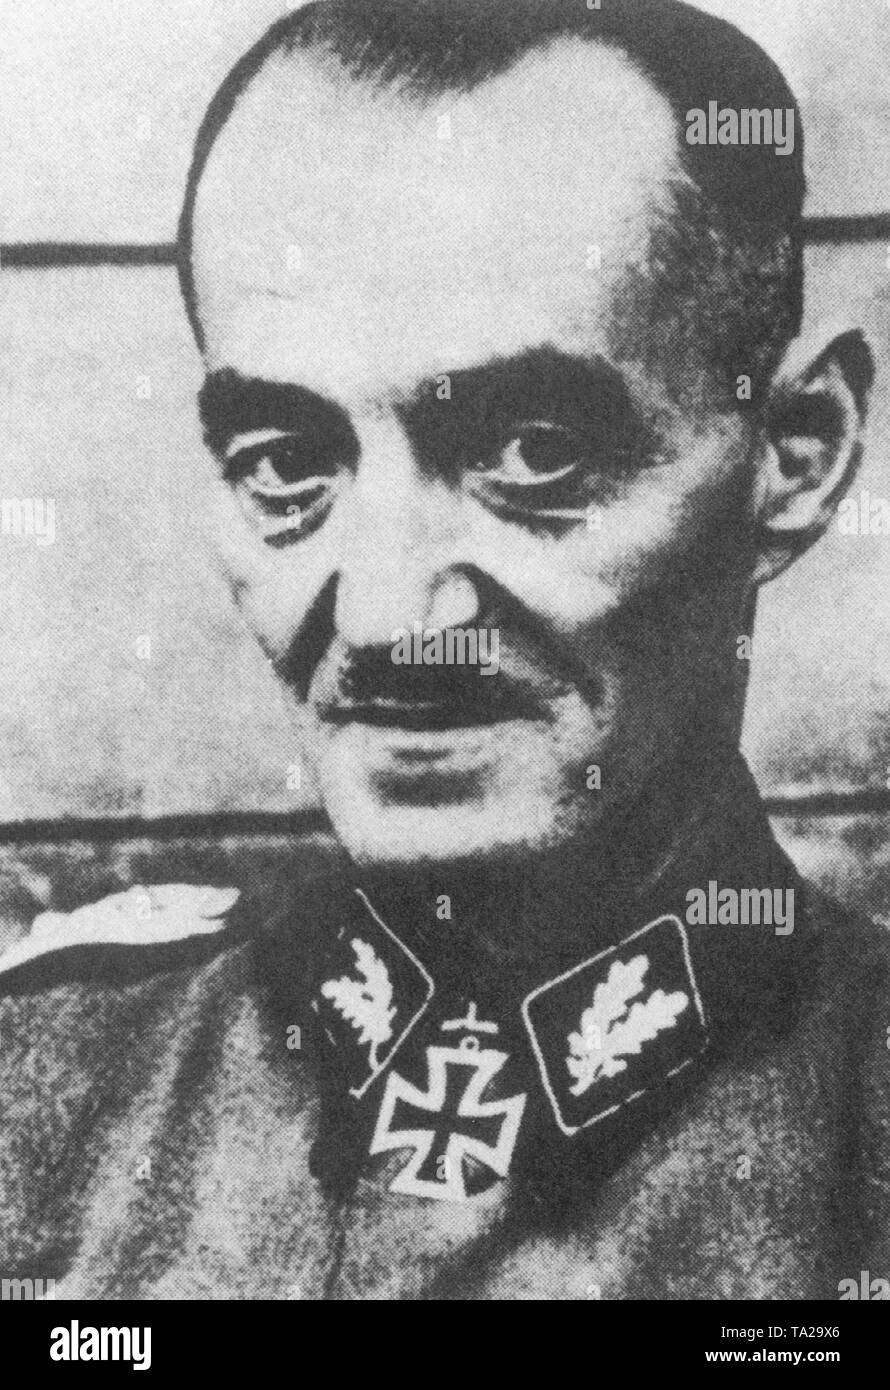 SS General Oskar Dirlewanger, commander of a special unit of notorious convicts and draftees. Stock Photo